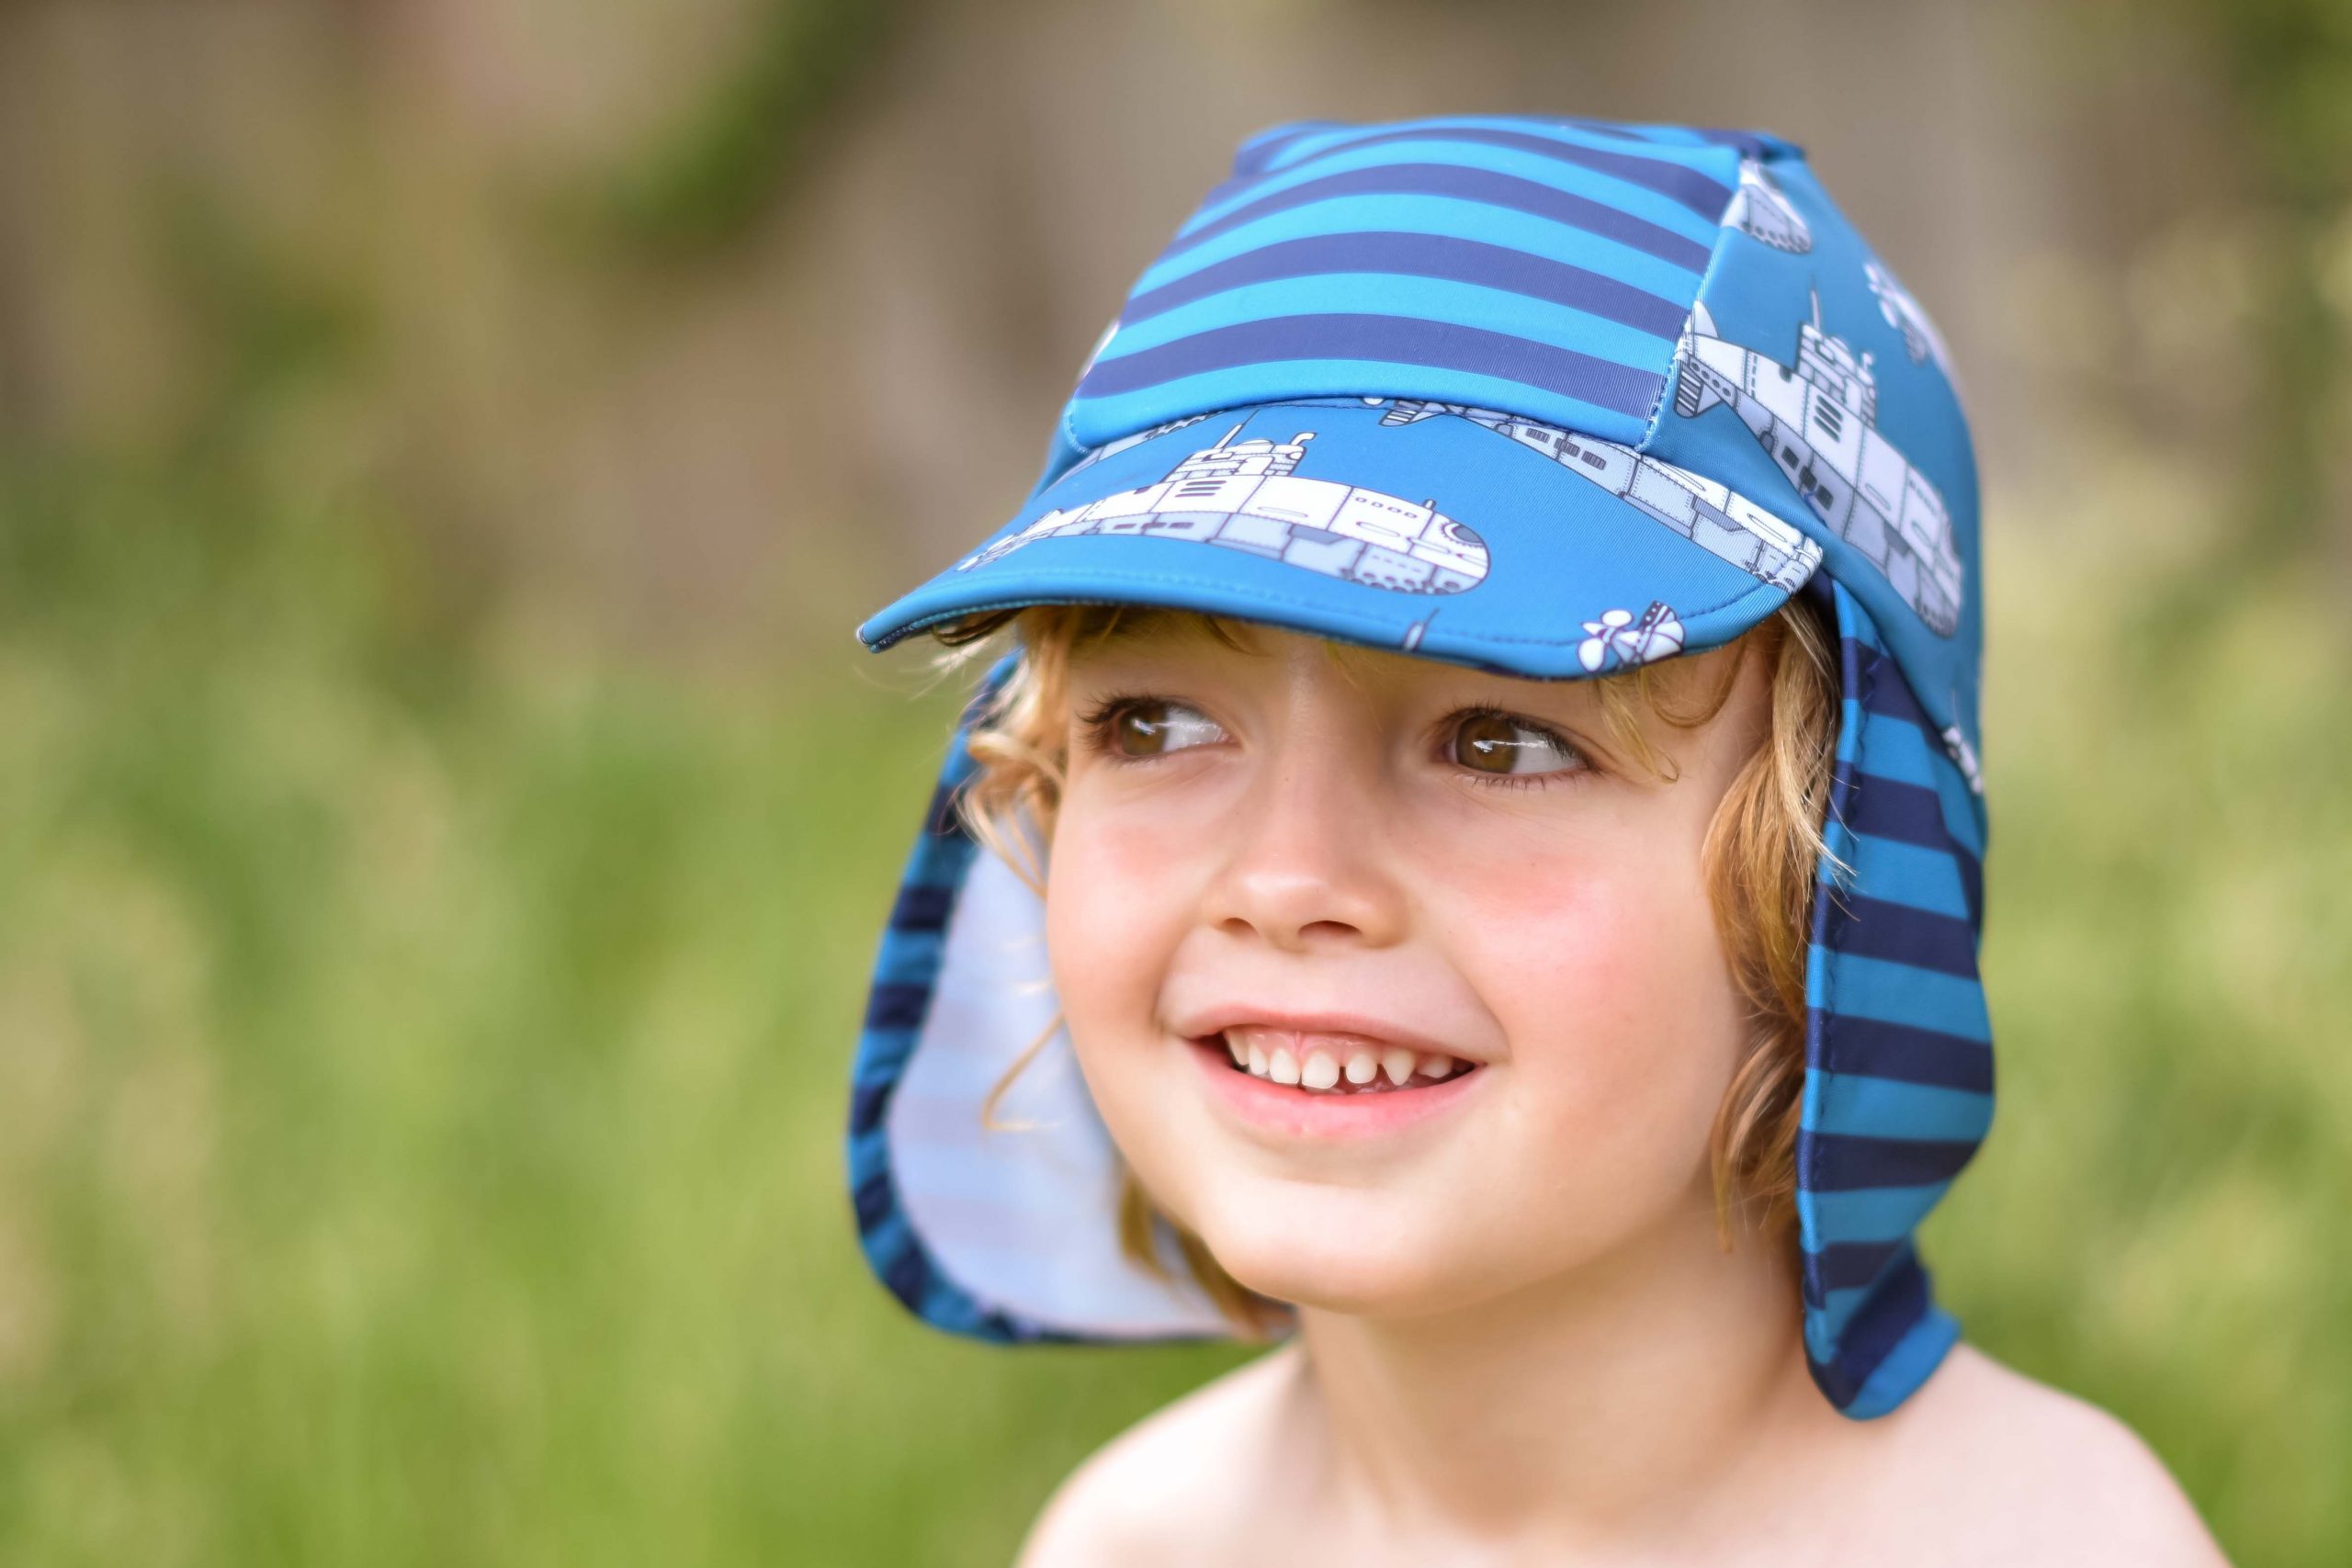 Waves & Wild Child/Adult Pool Party Sun Hat